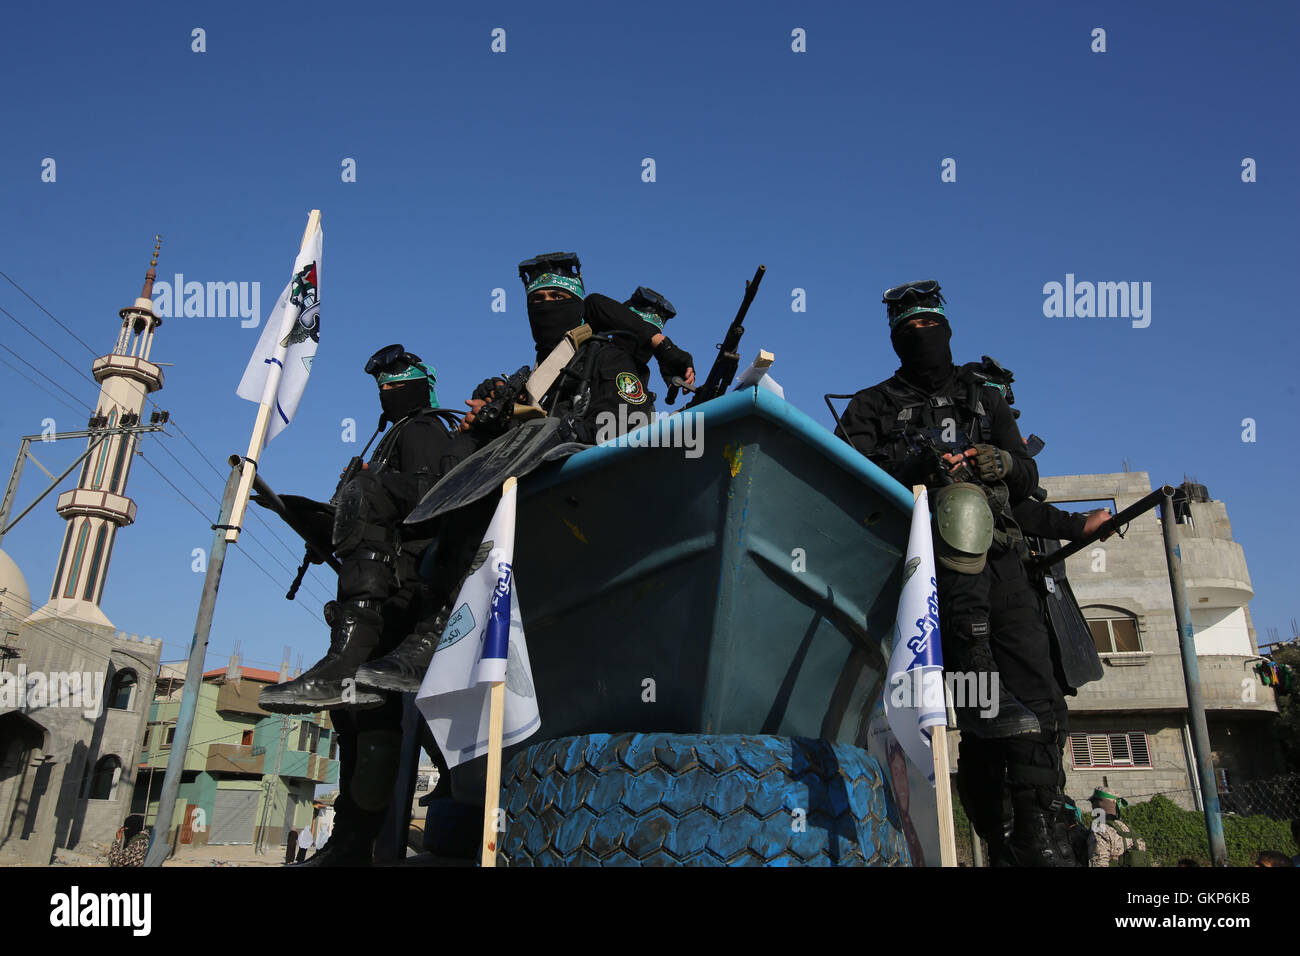 Gaza, Gaza Strip city of Rafah. 21st Aug, 2016. Palestinian members of al-Qassam Brigades, the armed wing of the Hamas movement, hold their weapons during an anti-Israel military parade, in the southern Gaza Strip city of Rafah, on Aug. 21, 2016. © Khaled Omar/Xinhua/Alamy Live News Stock Photo